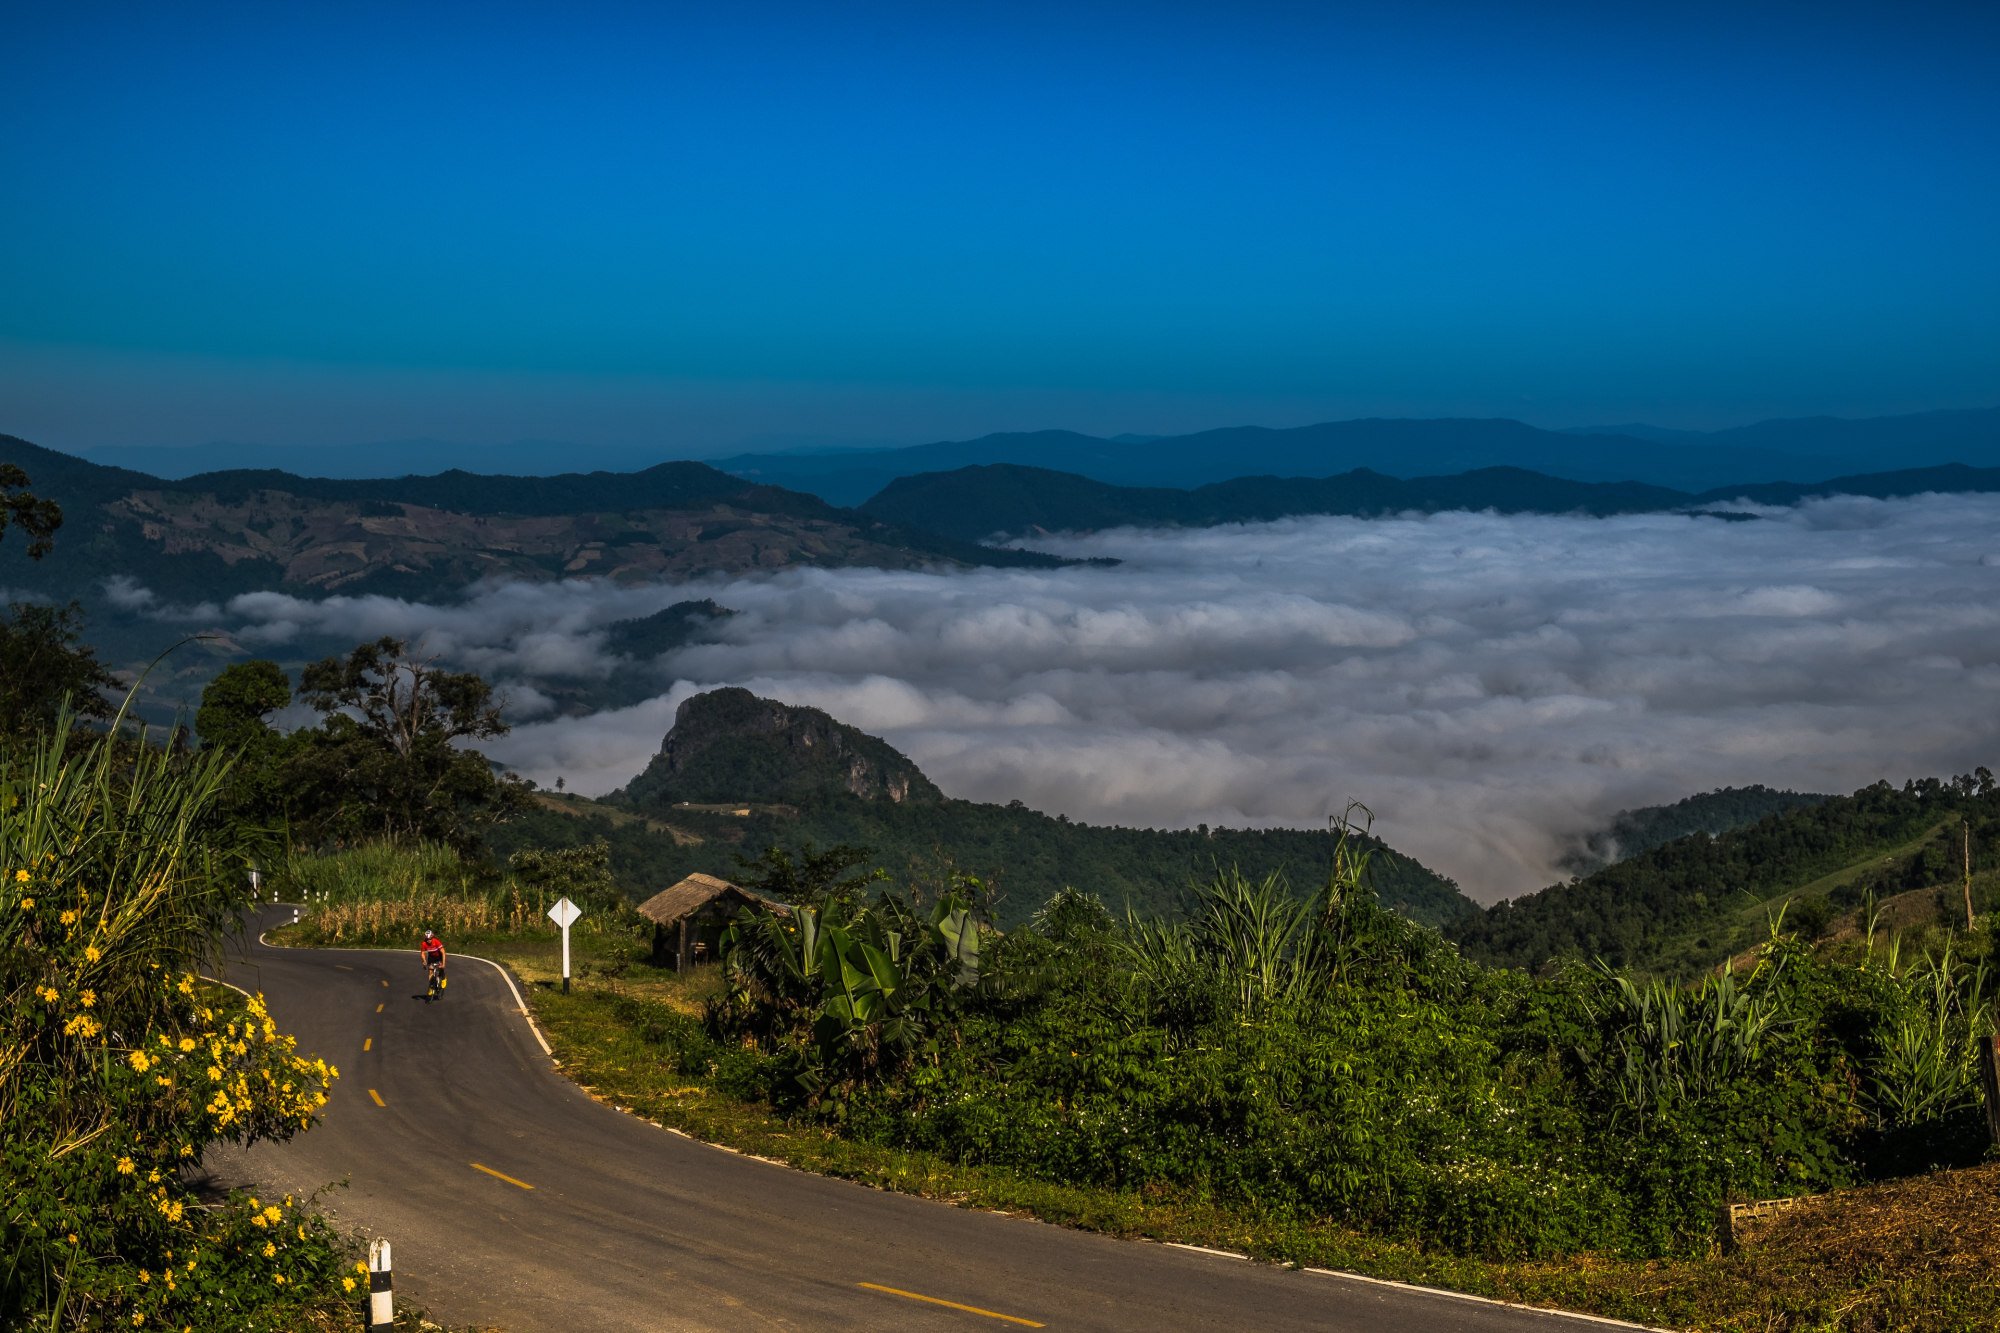 The hills and valleys of northern Thailand make it a prime destination for cyclists of all abilities. Photo: Steve Thomas